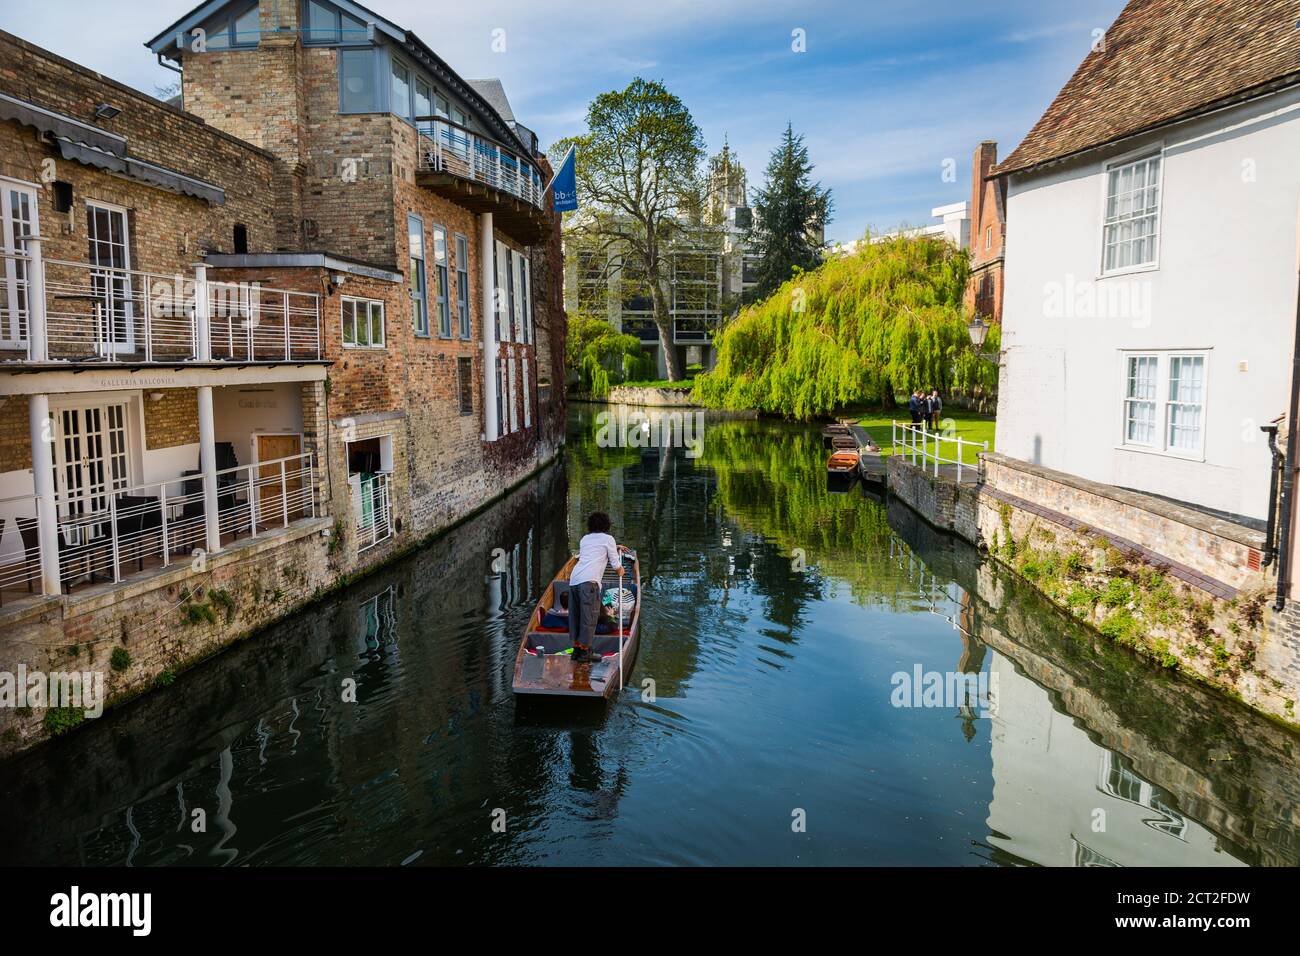 A view along the river Camb on magdalene bridge Cambridge UK, with punts on the river. Stock Photo